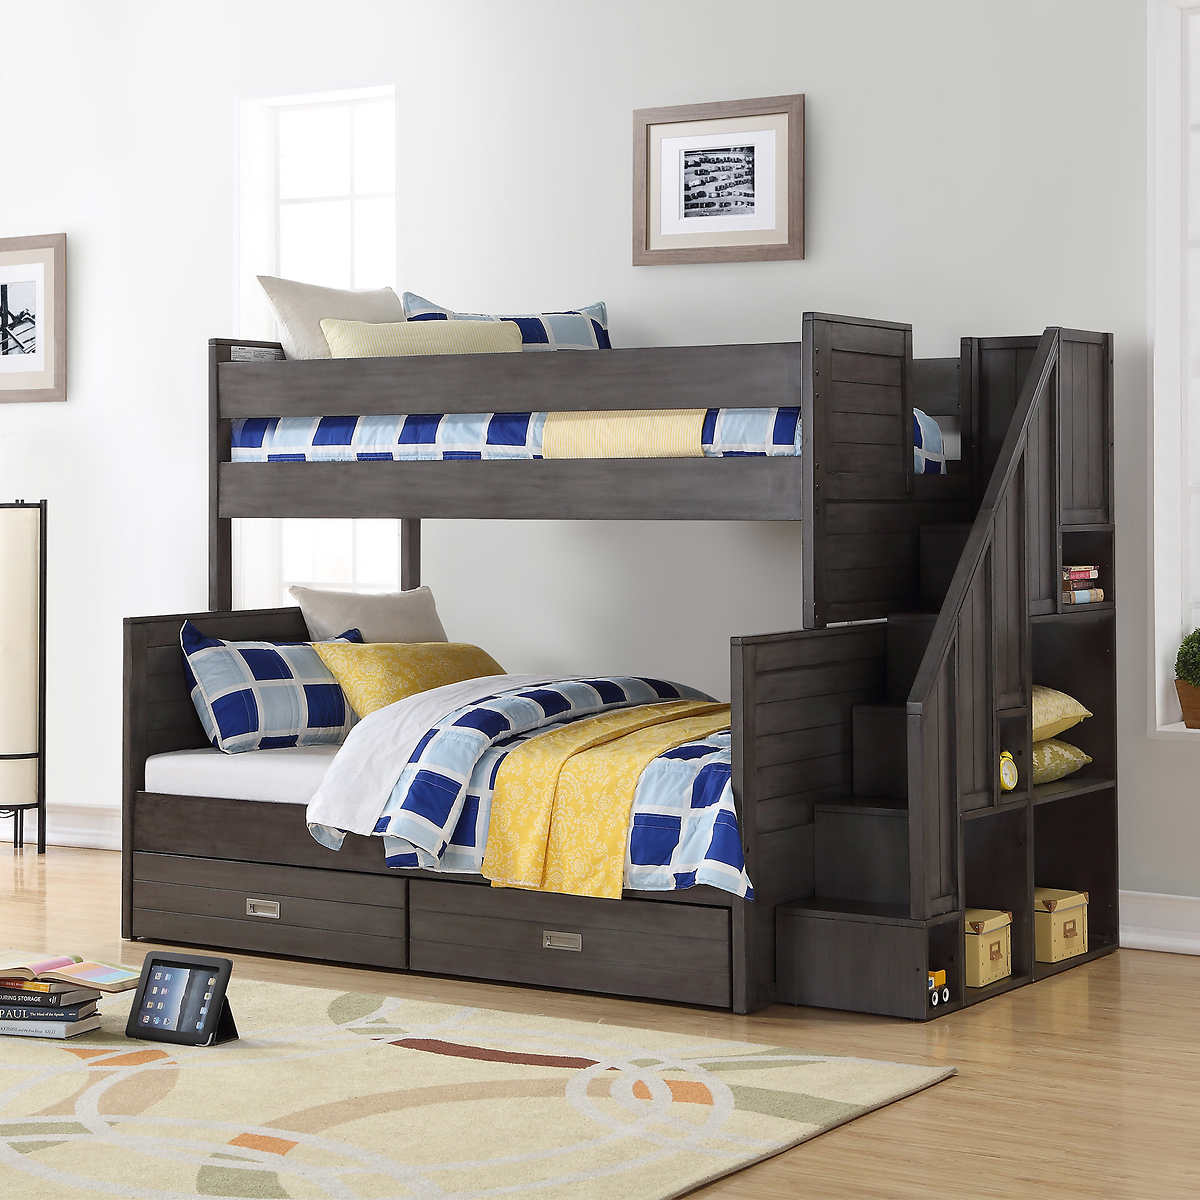 Caramia Kids Dylan Twin Over Full Bunk, Do Bunk Beds Need Box Springs